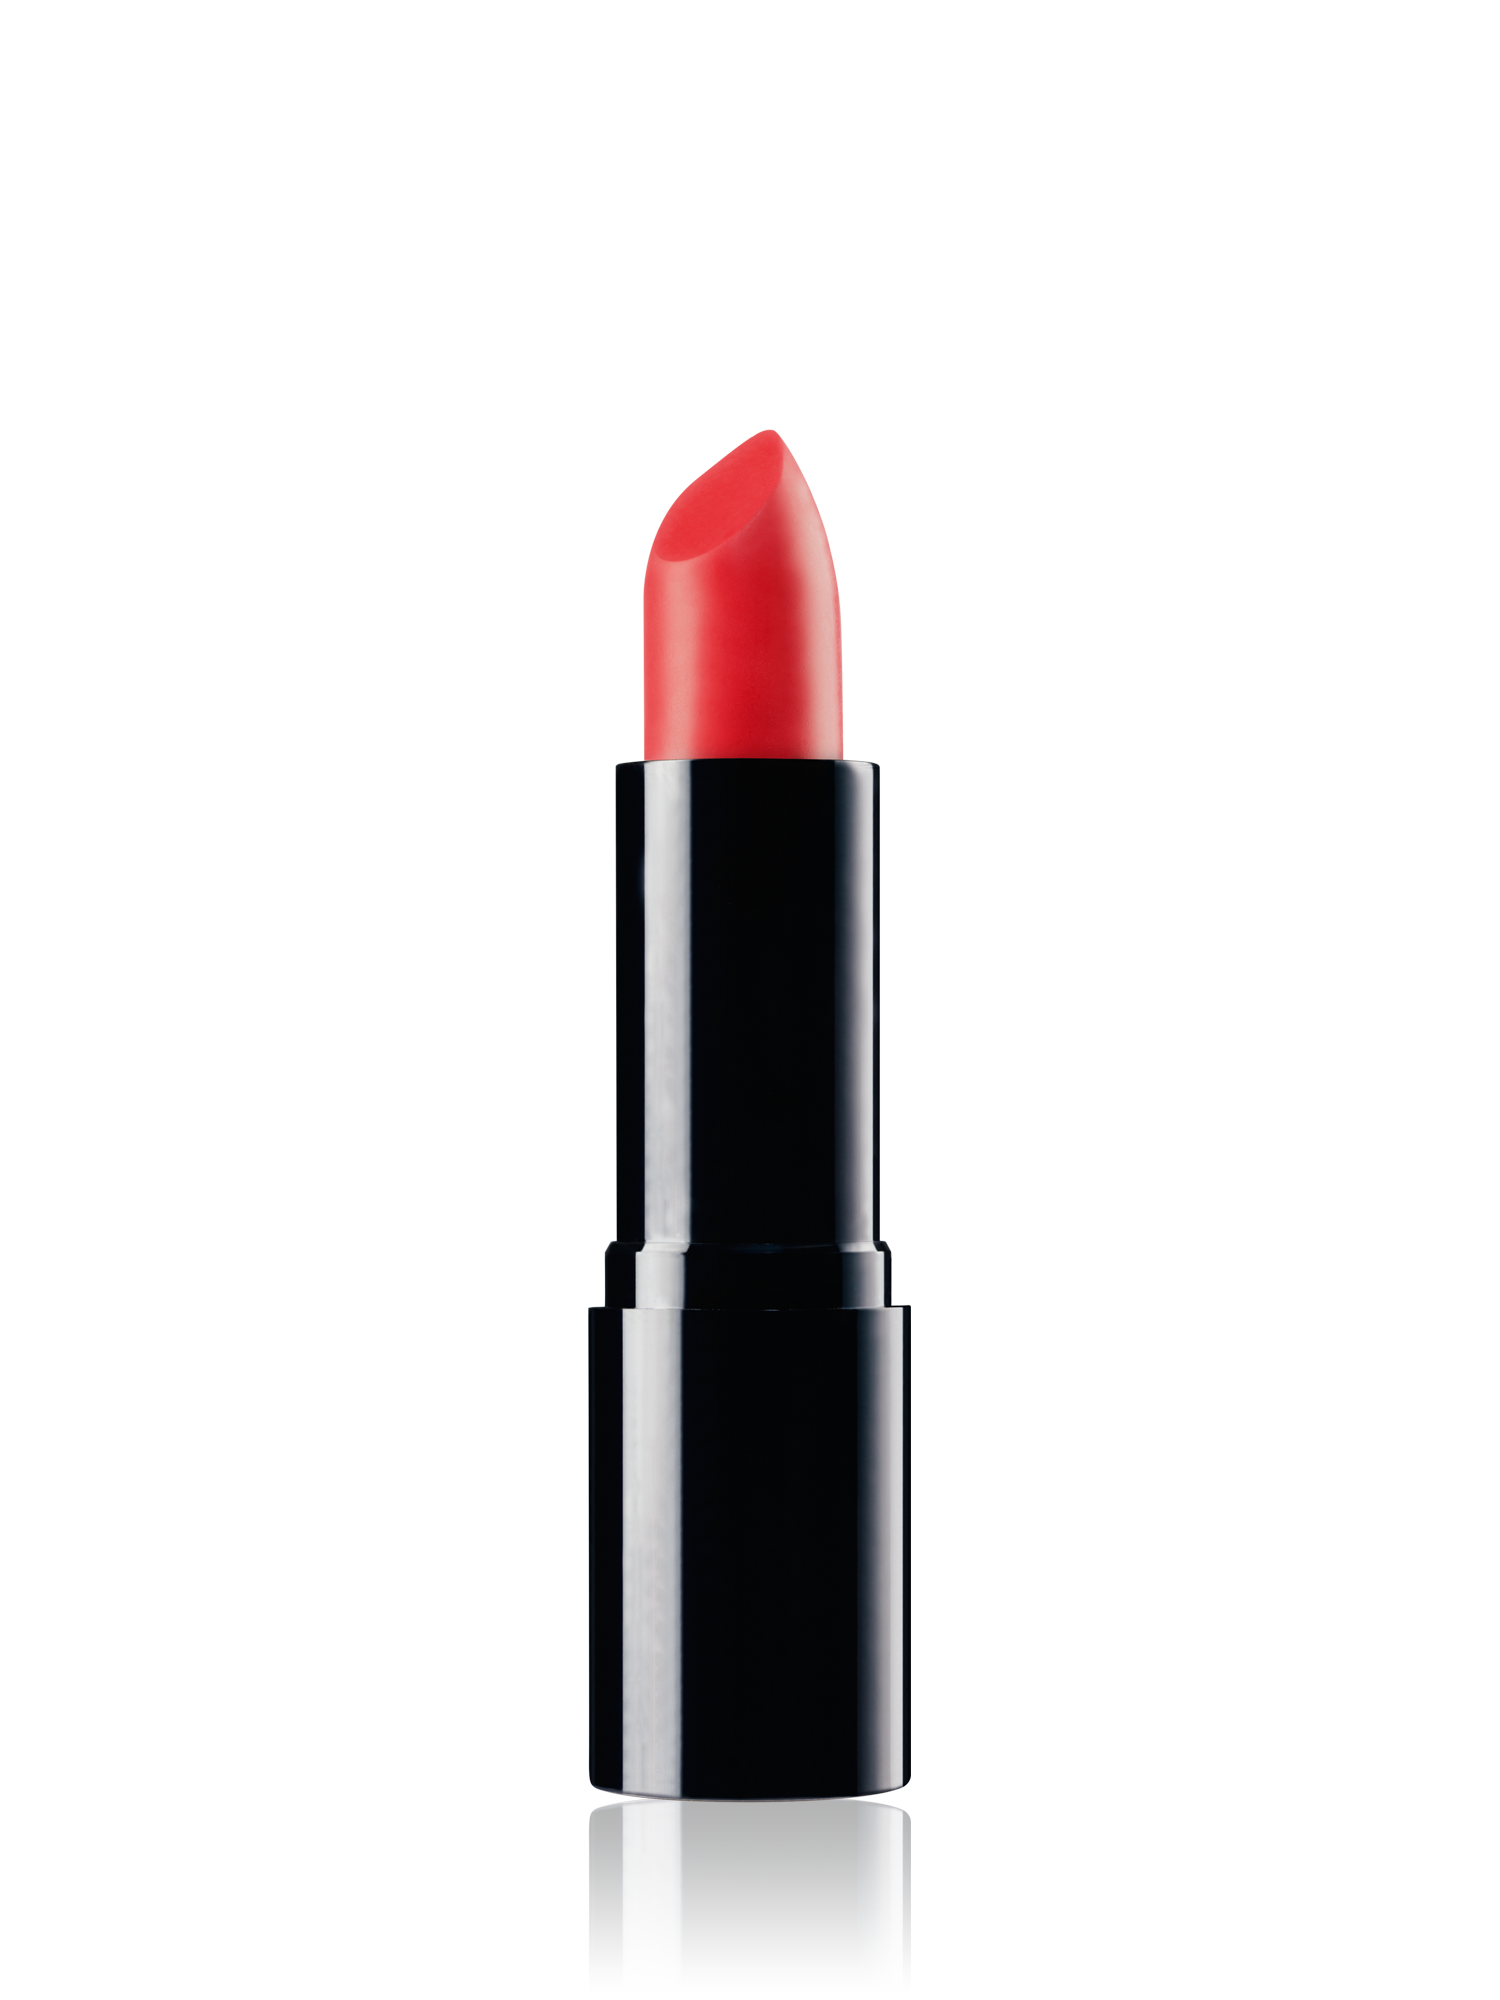 Lipstick PNG Free Download